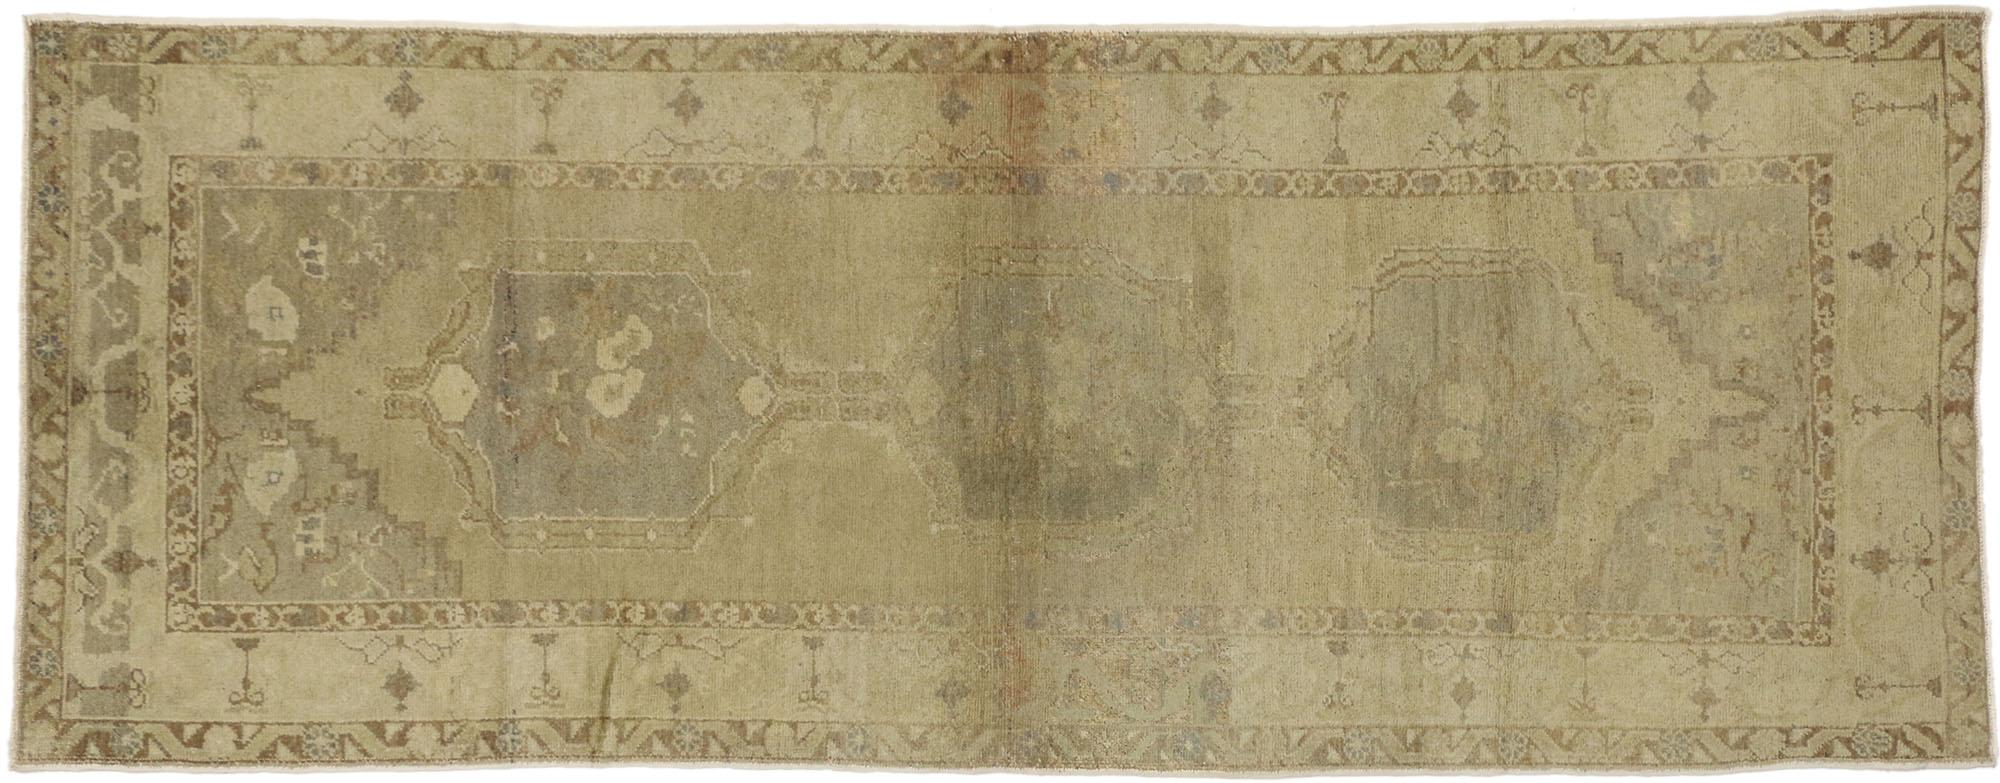 50837 Vintage Turkish Oushak Runner, Hallway Runner, 3'10 x 9'10. This hand-knotted wool vintage Turkish Oushak runner with rustic style features three amulet-style medallions on an abrashed ecru background. It is surrounded by a delicate border and